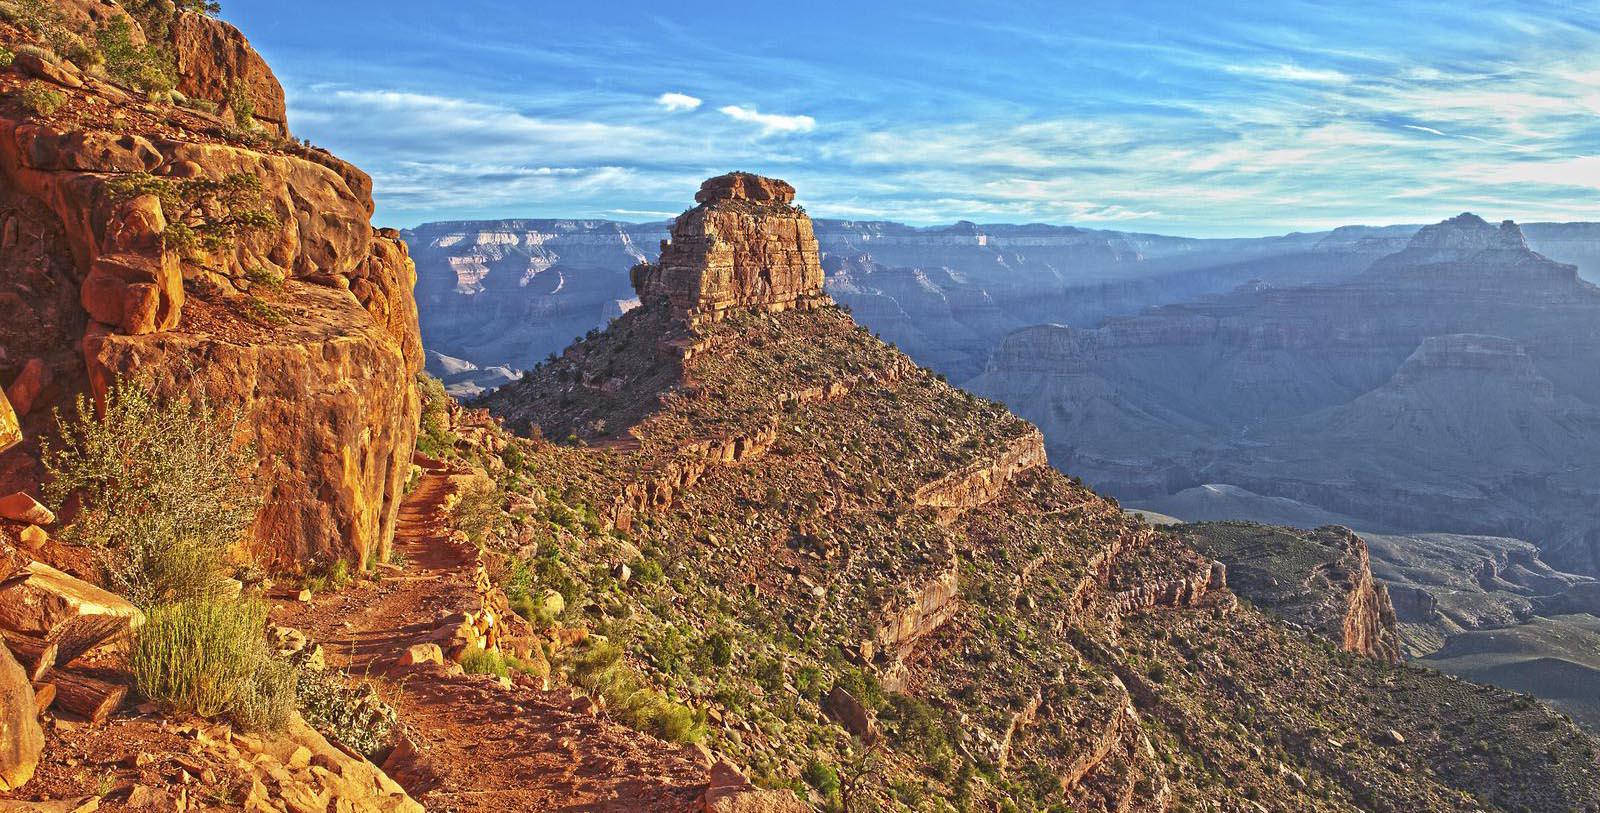 Explore the Grand Canyon National Park's 1.8 billion-year-old rock formations.